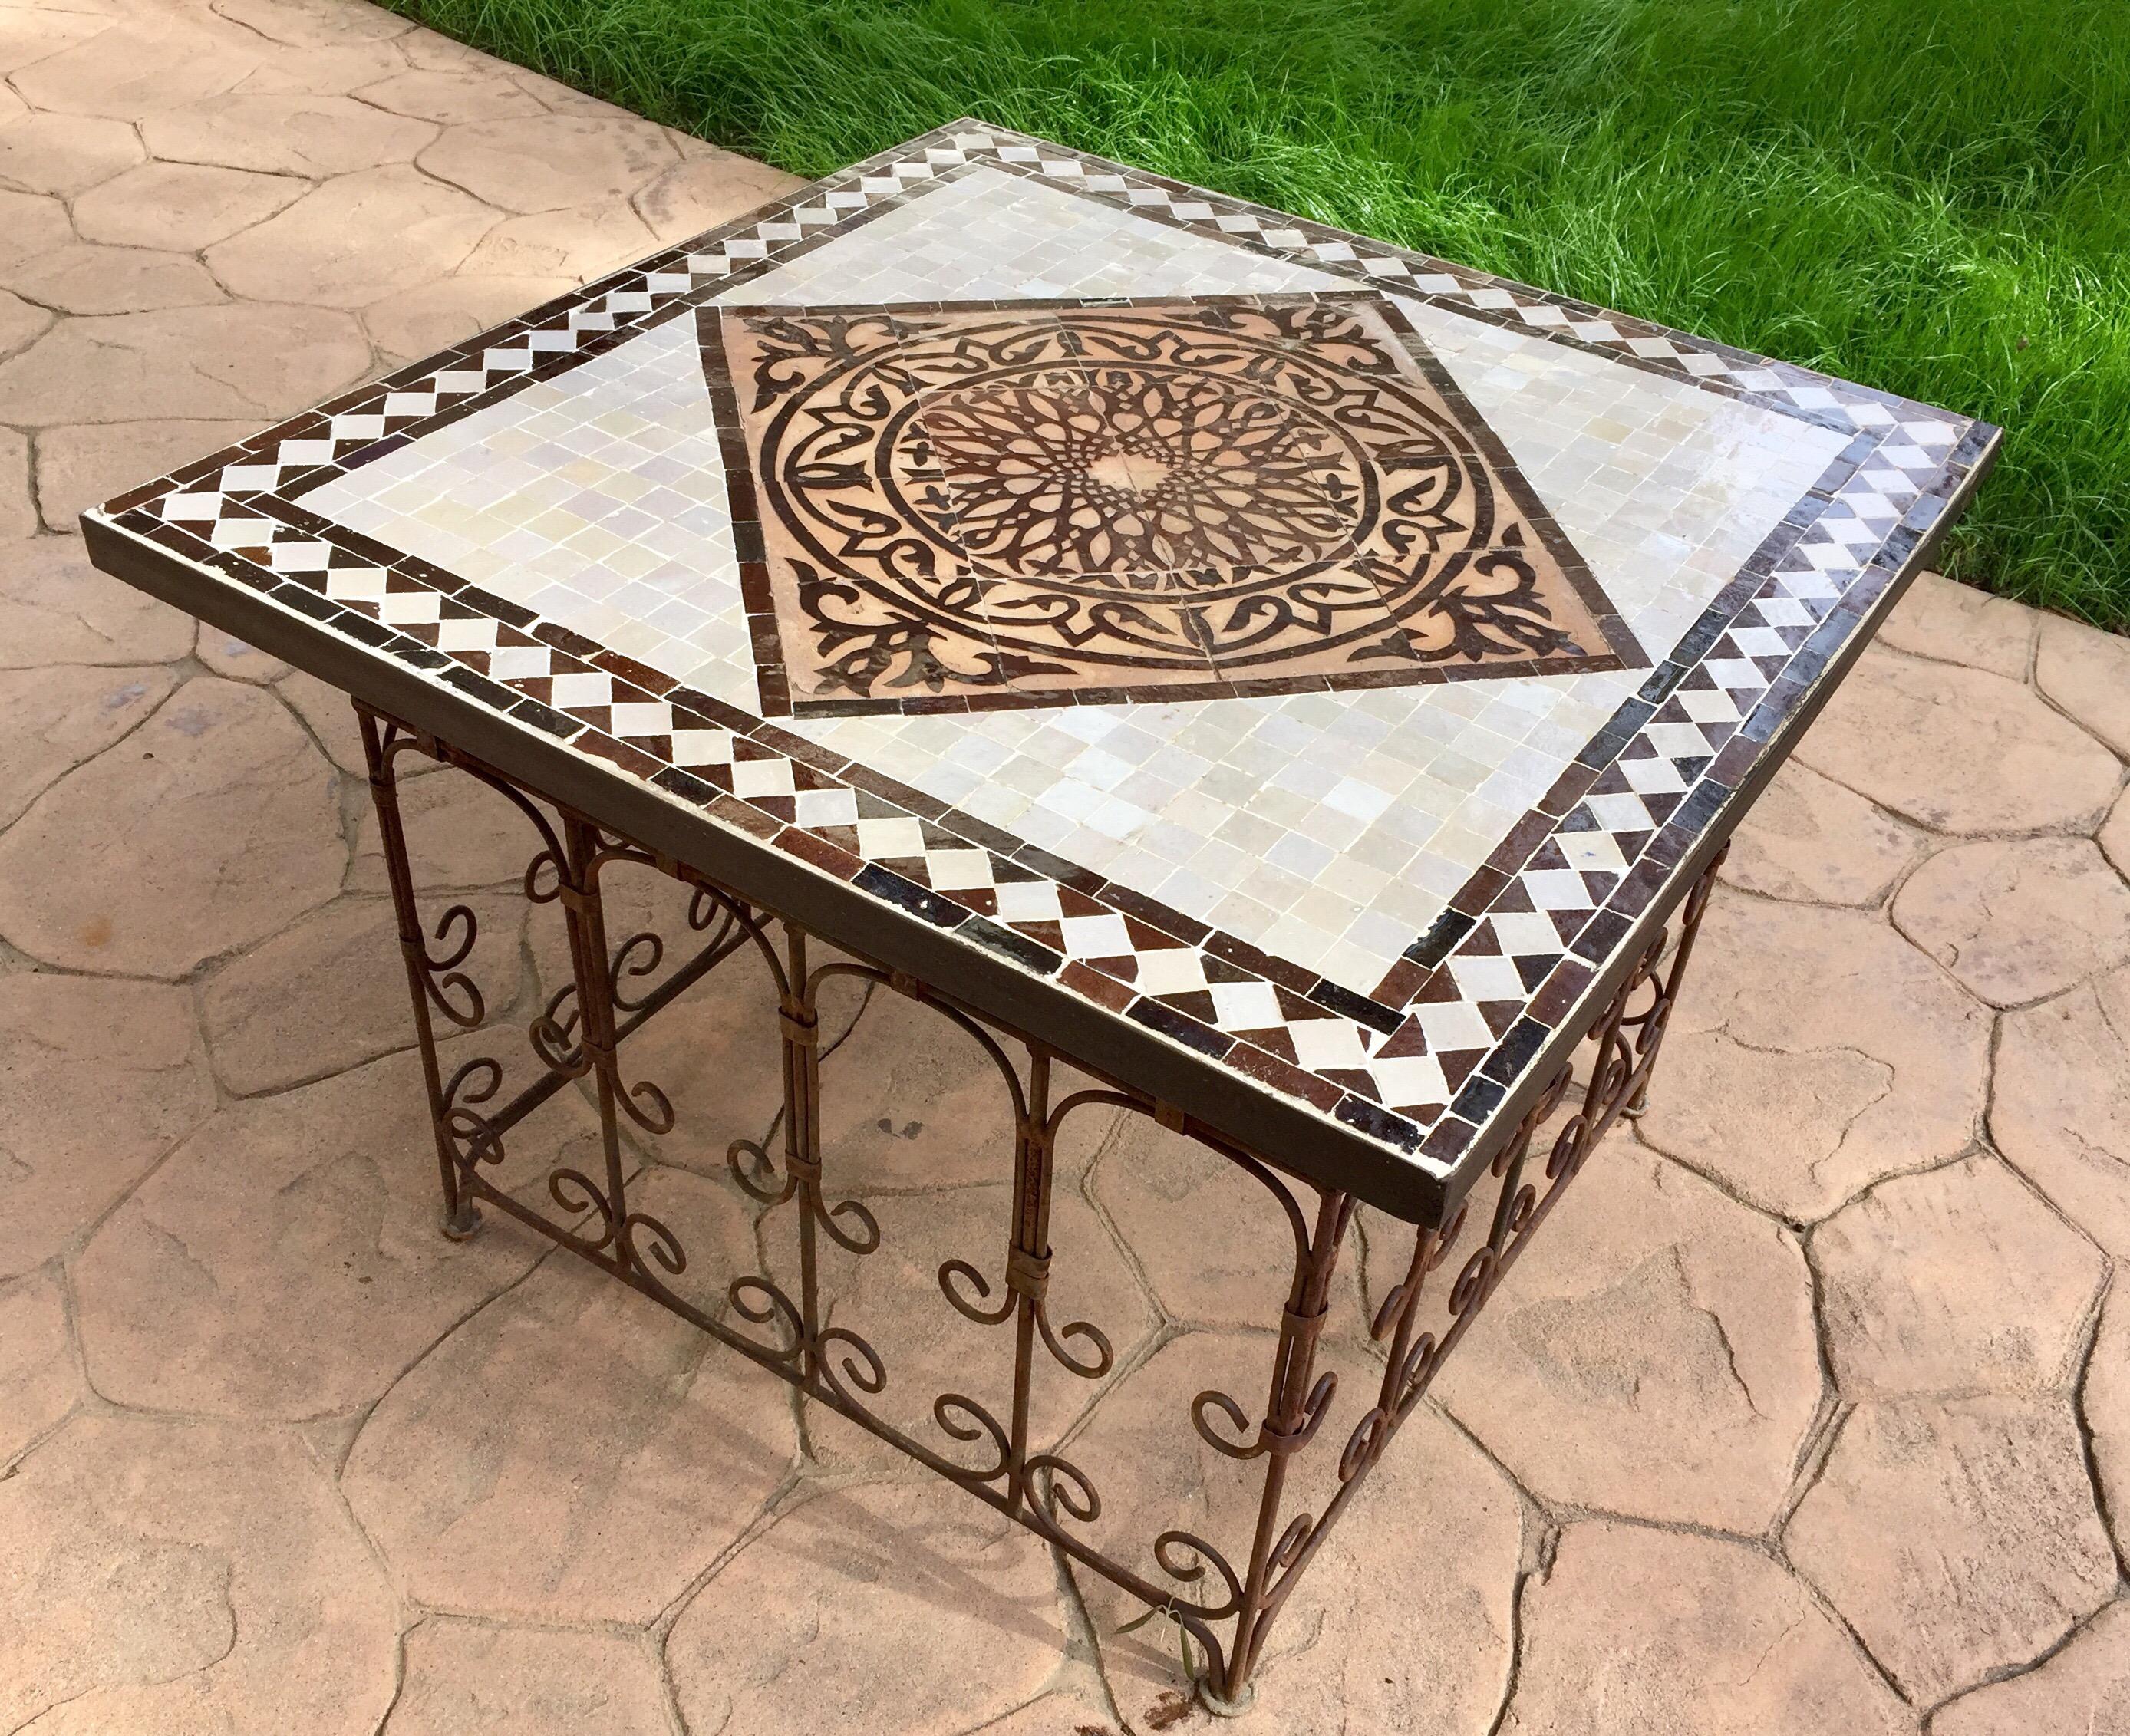 Great Moroccan mosaic tile coffee table, or side table delicately handcrafted in Fez with traditional Moorish geometric hand chased design in earth tone brown, back, off white colors glazed tiles.
The handcrafted zellige tile table sits on an iron